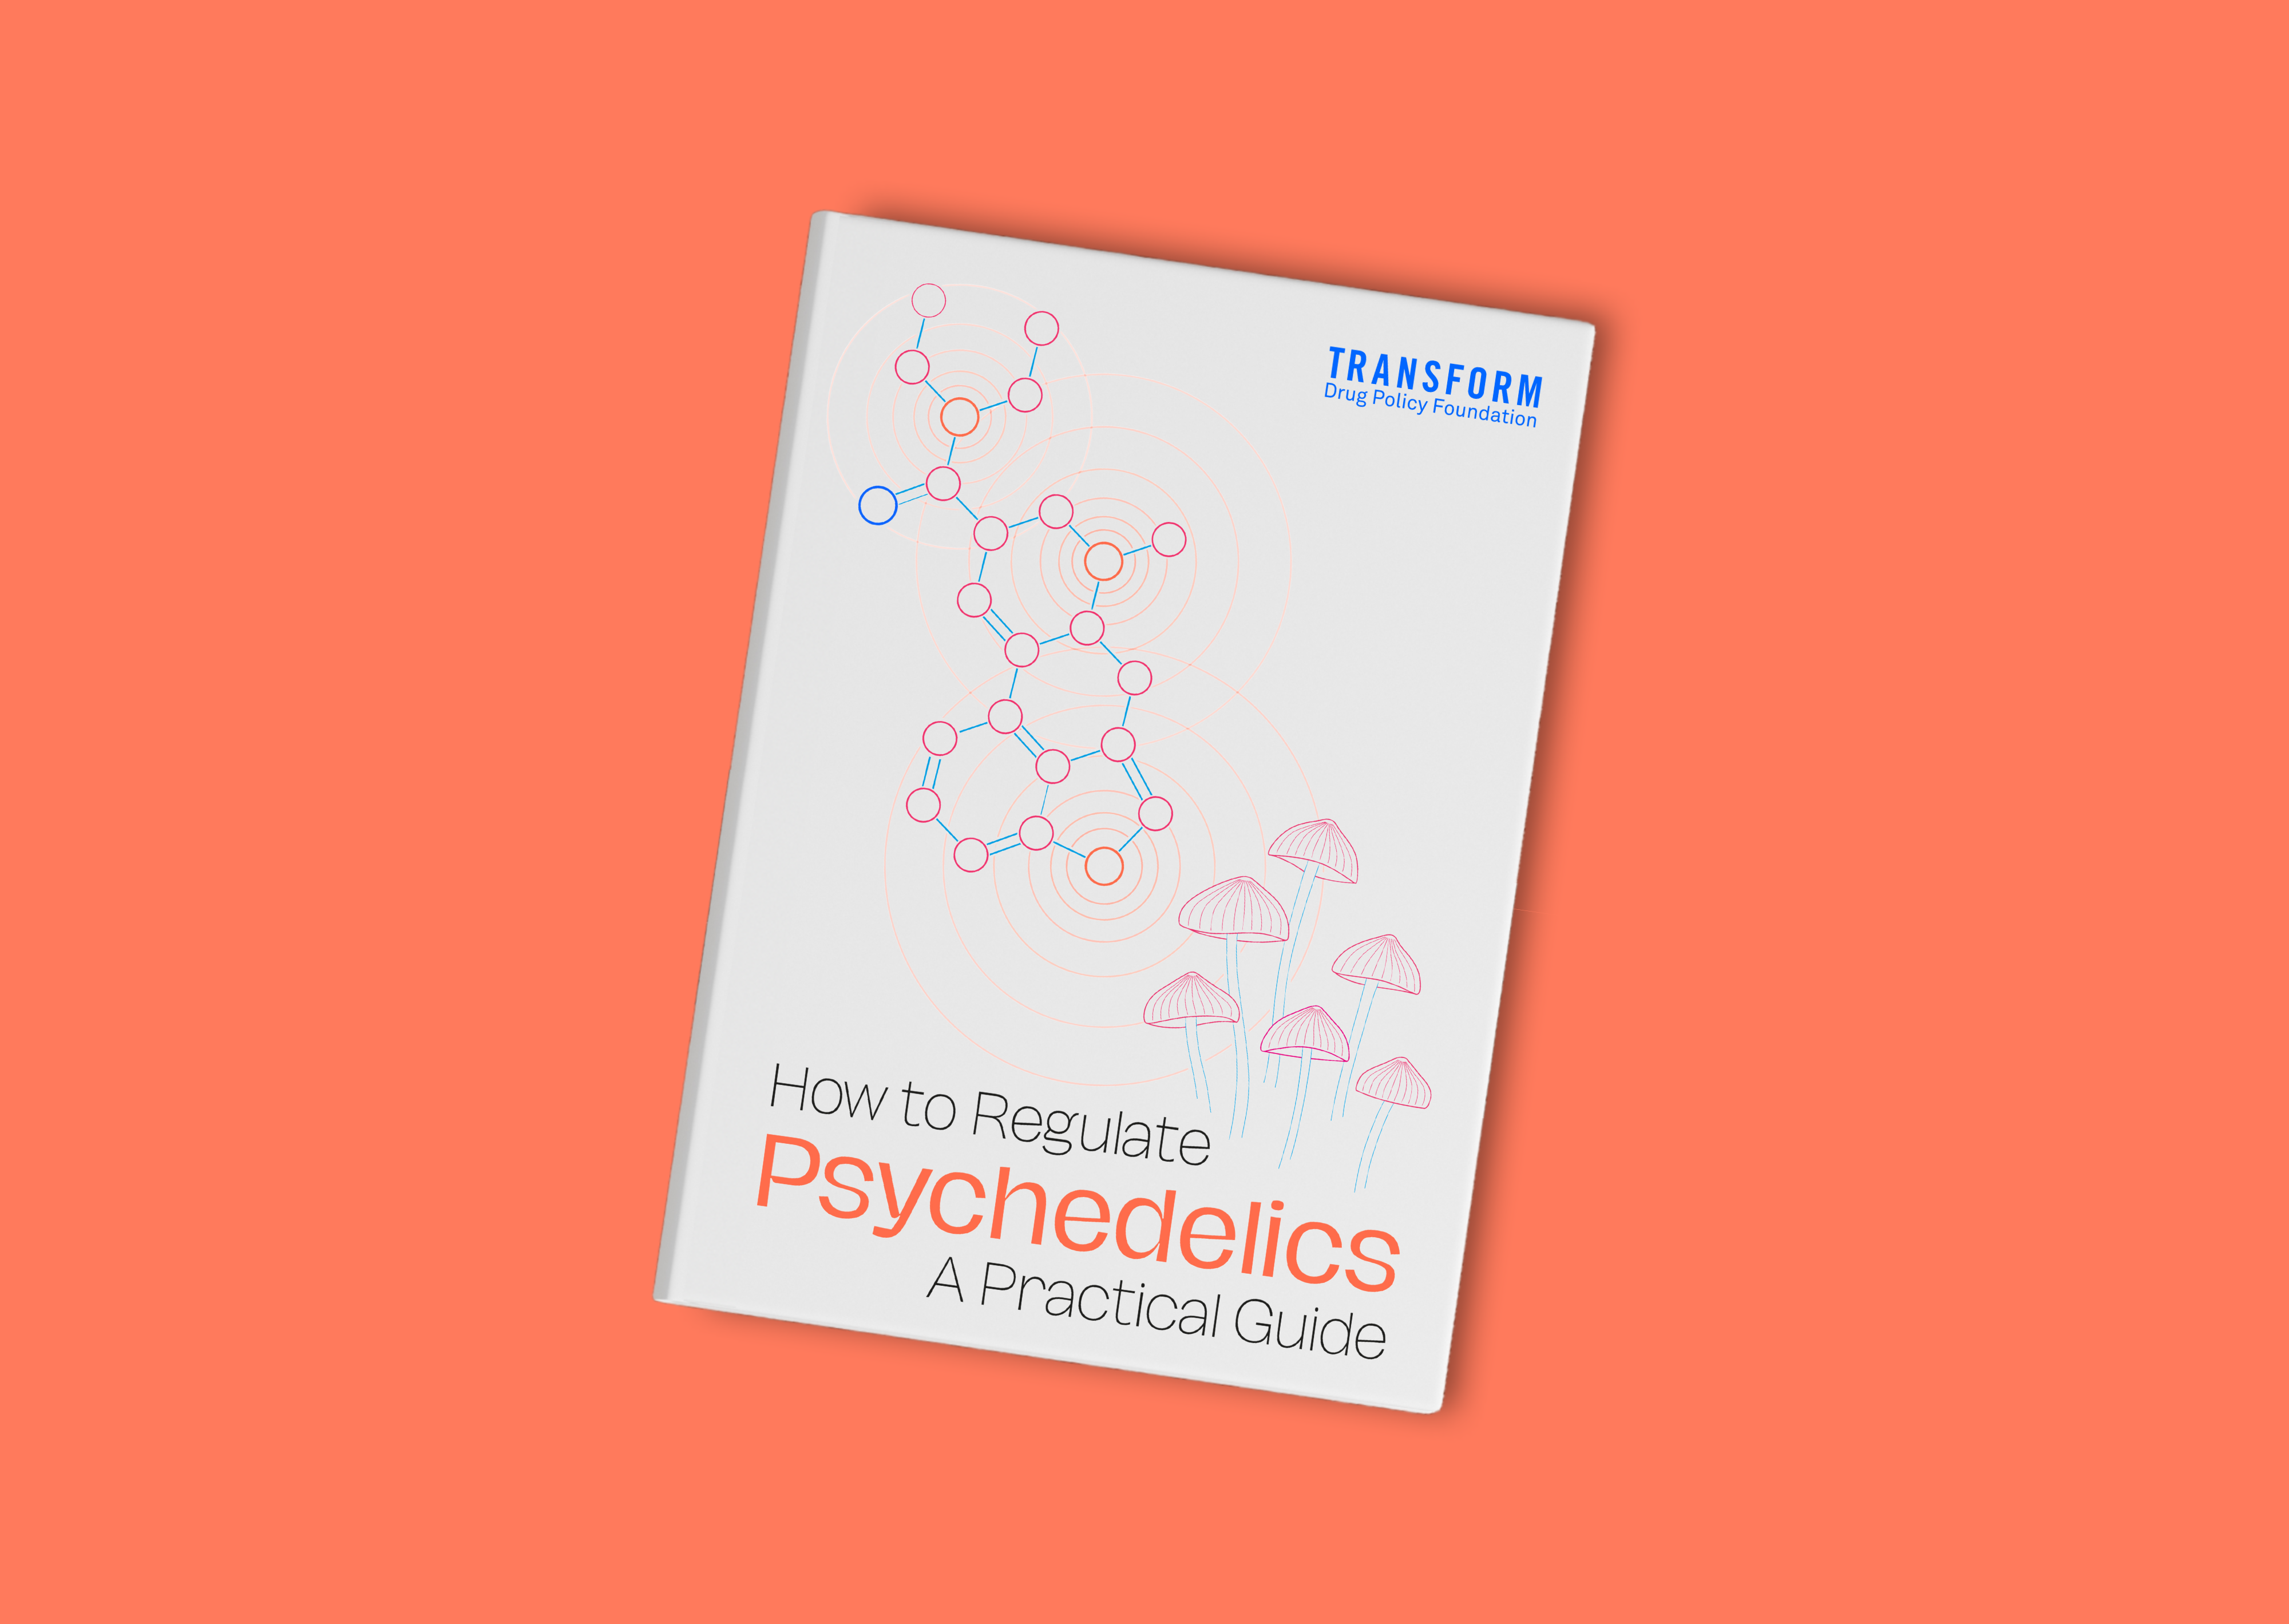 How to regulate psychedelics